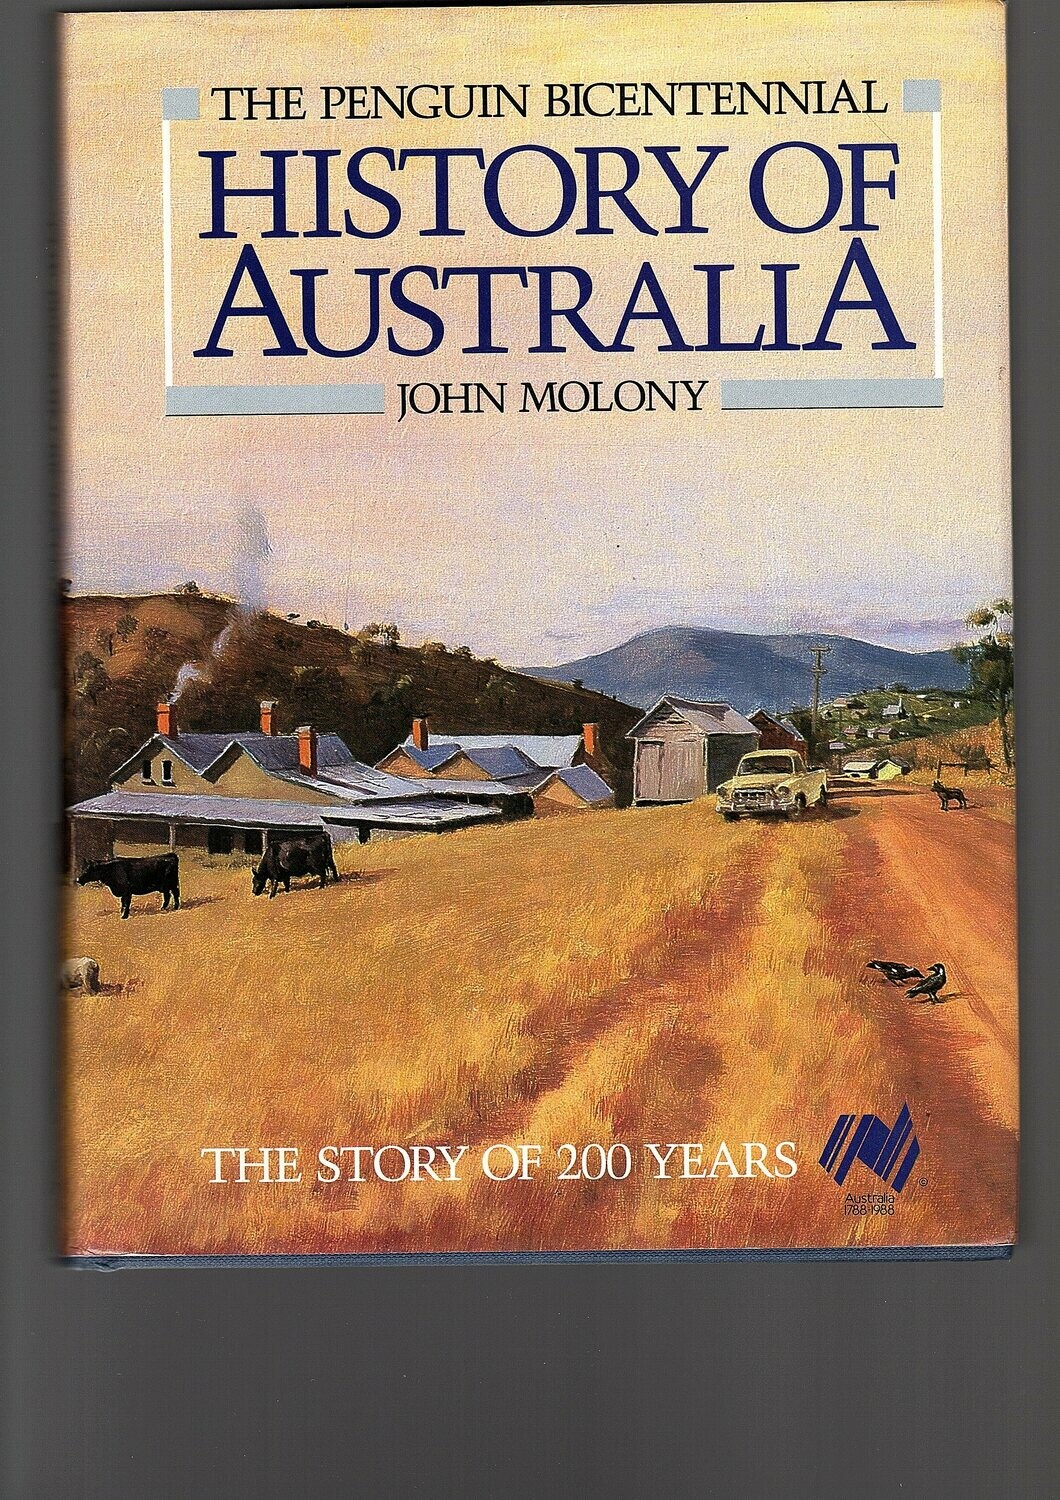 The Penguin Bicentennial History of Australia: The Story of 200 Years by John N Molony